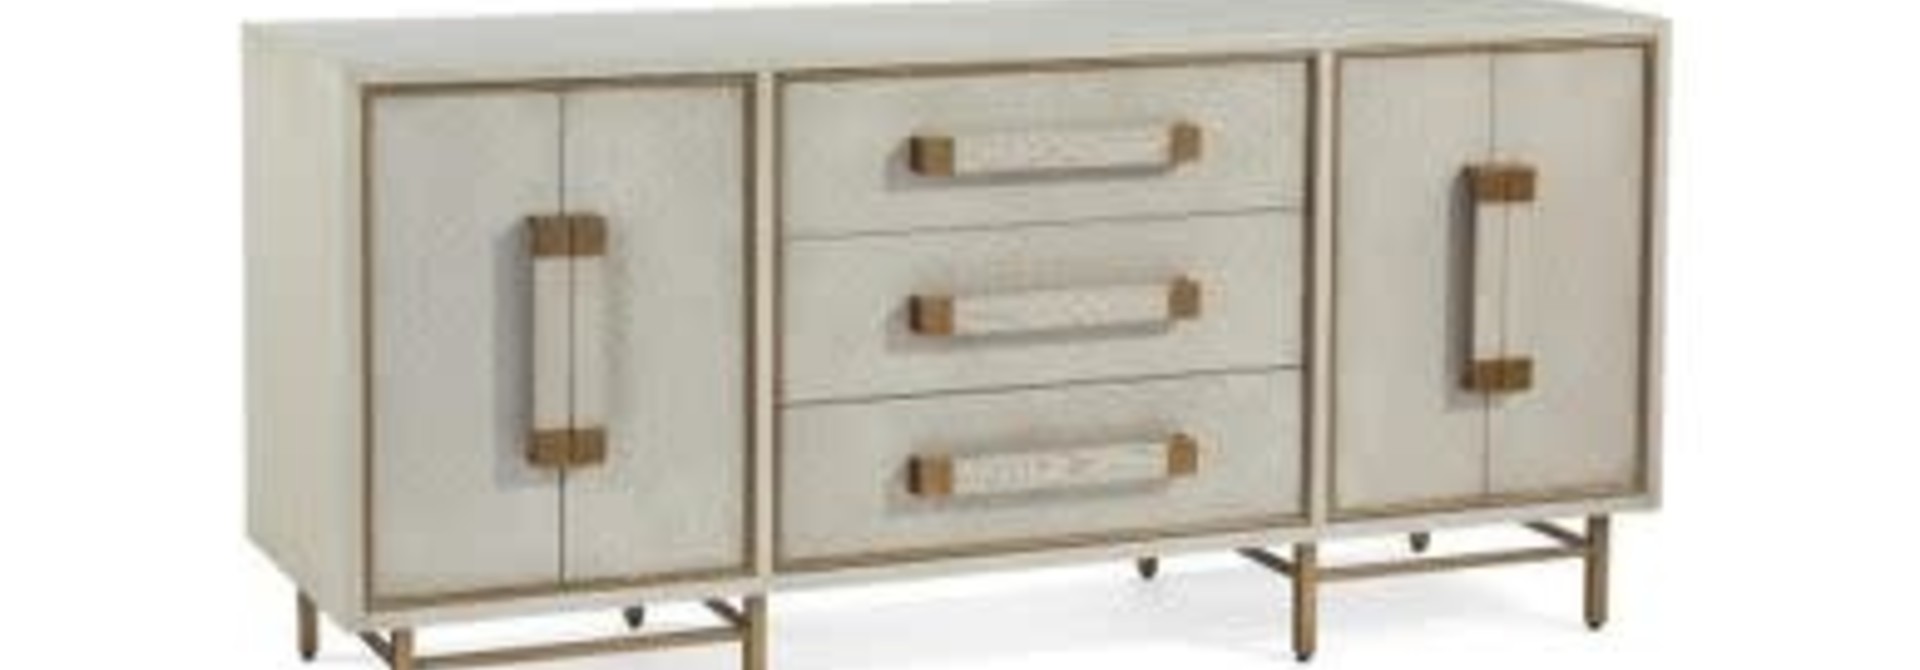 Montego | The Sideboard Collection - 84 Inch x 21 Inch x 34 Inch